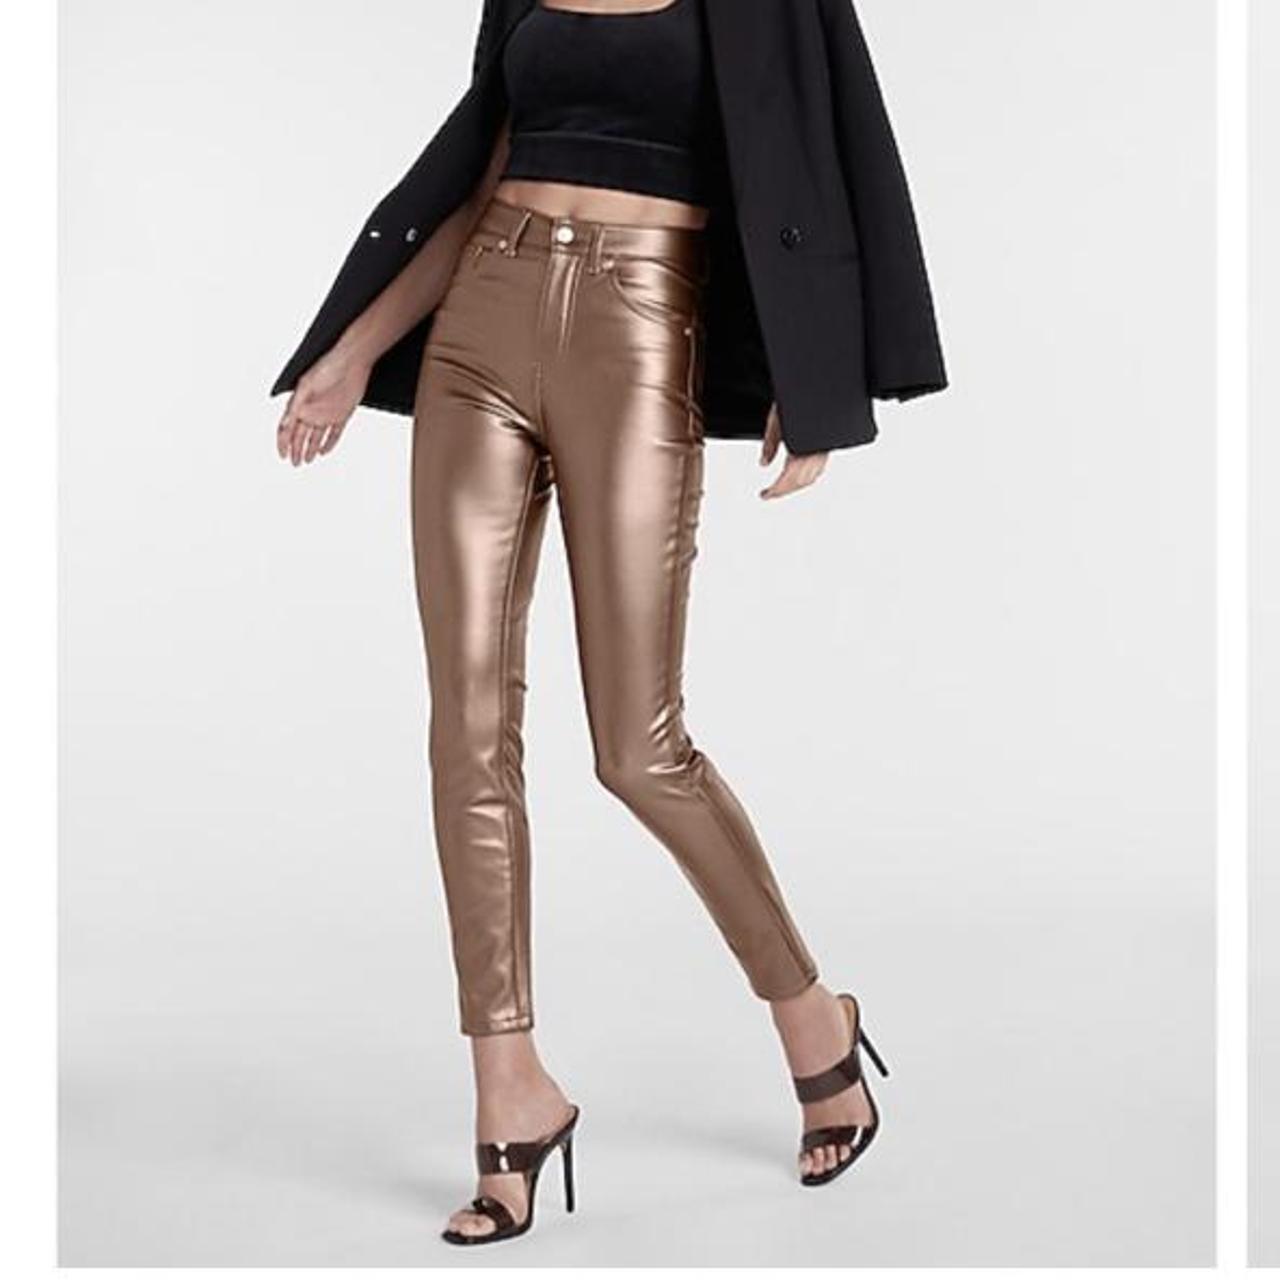 M&S' 'very flattering' faux leather leggings are back in six shades for  autumn | Express.co.uk